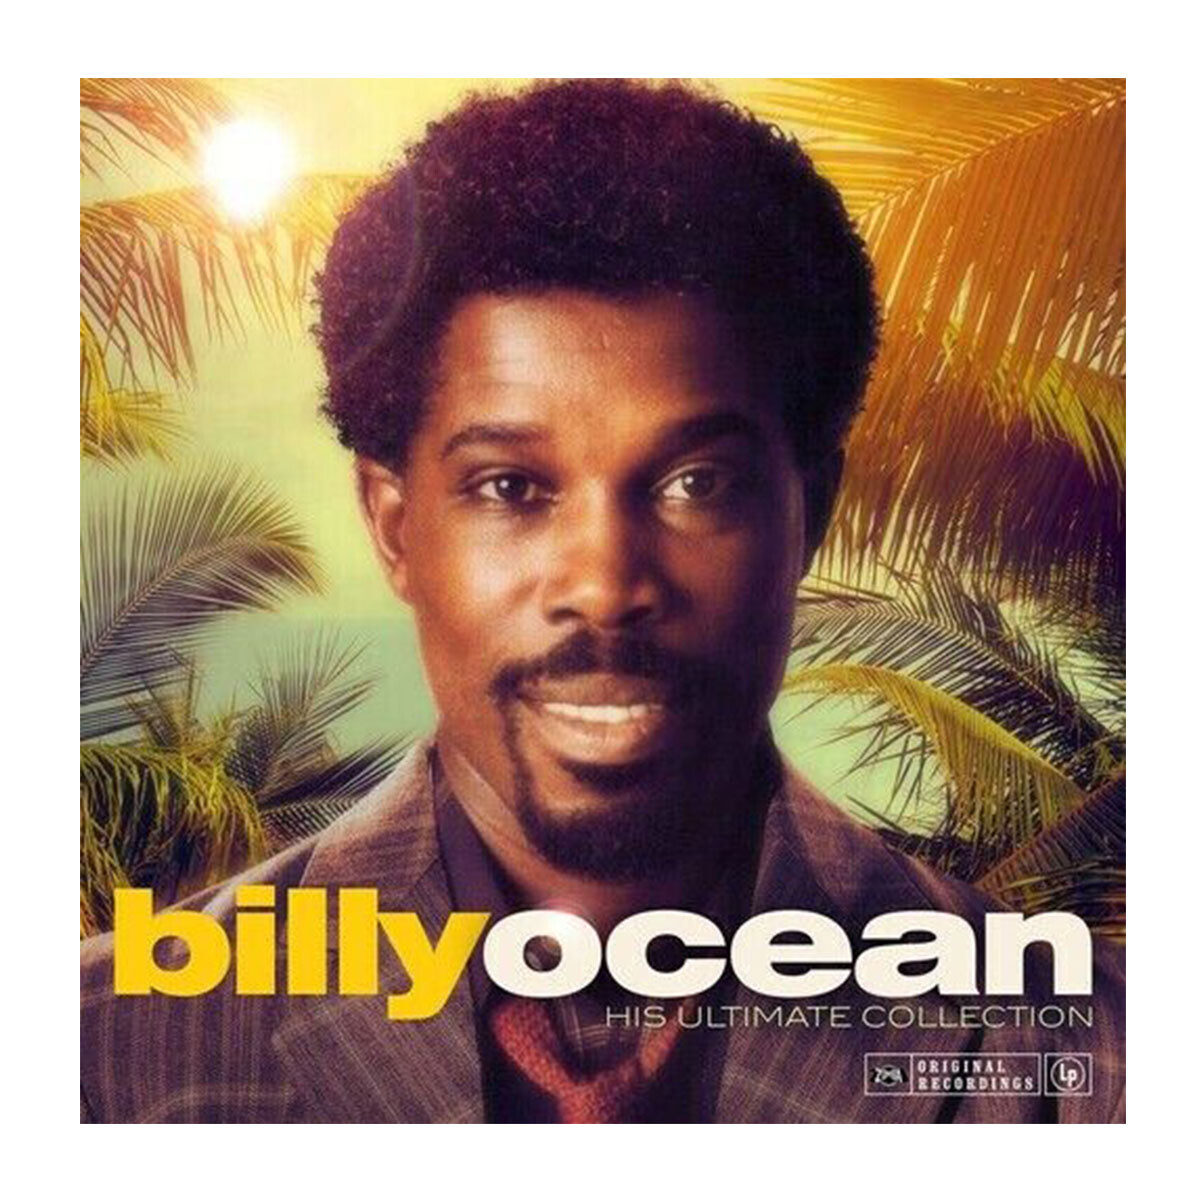 (l) Ocean,billy - His Ultimate Collection - Vinilo 